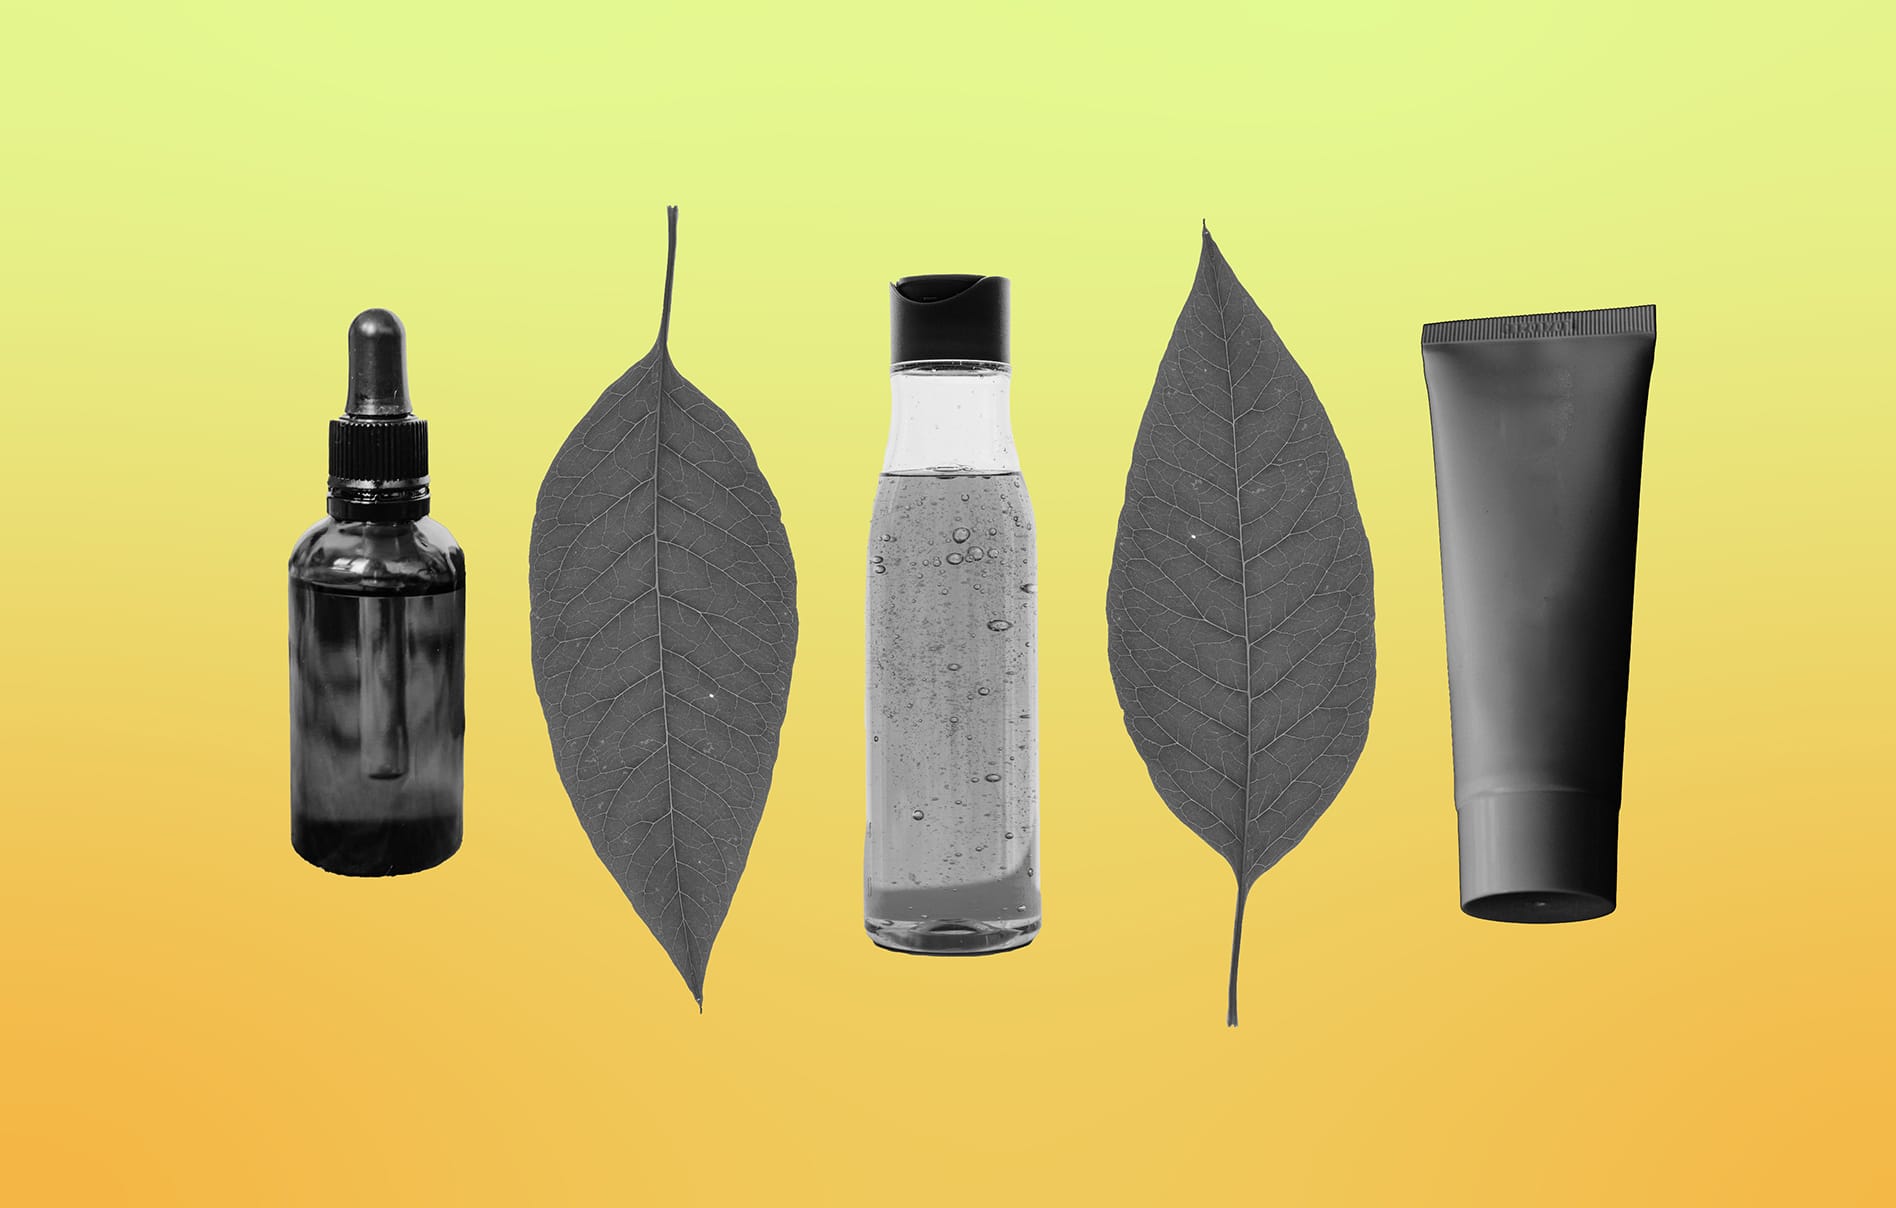 Plastic product bottles and leaves